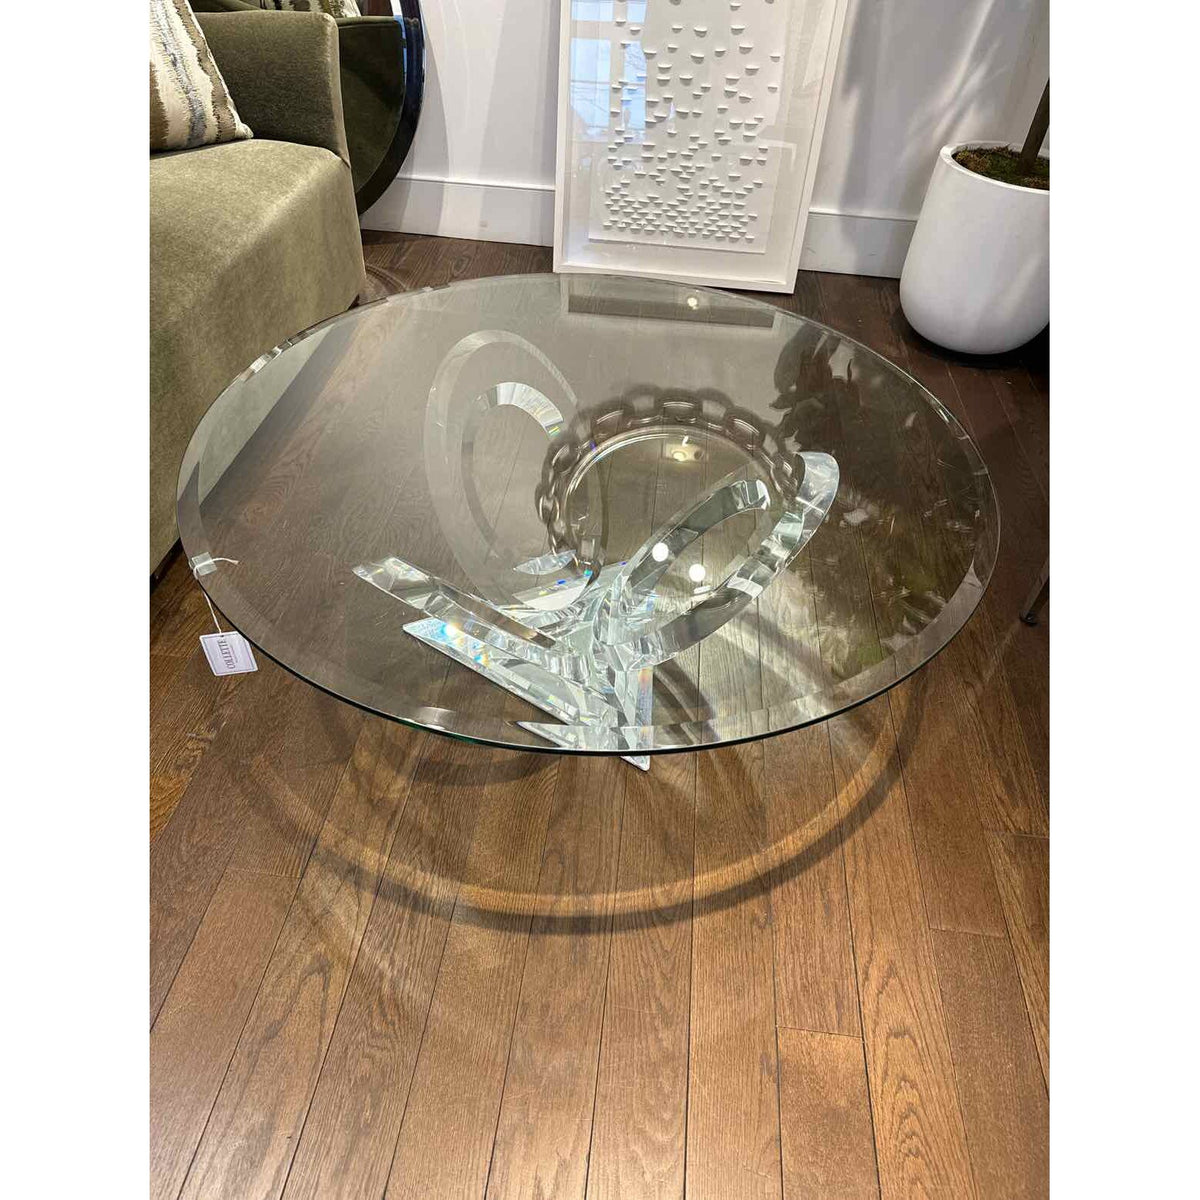 1990's Mikhail Loznikov "Eclipse of Time" Lucite & Glass Coffee Table Signed and